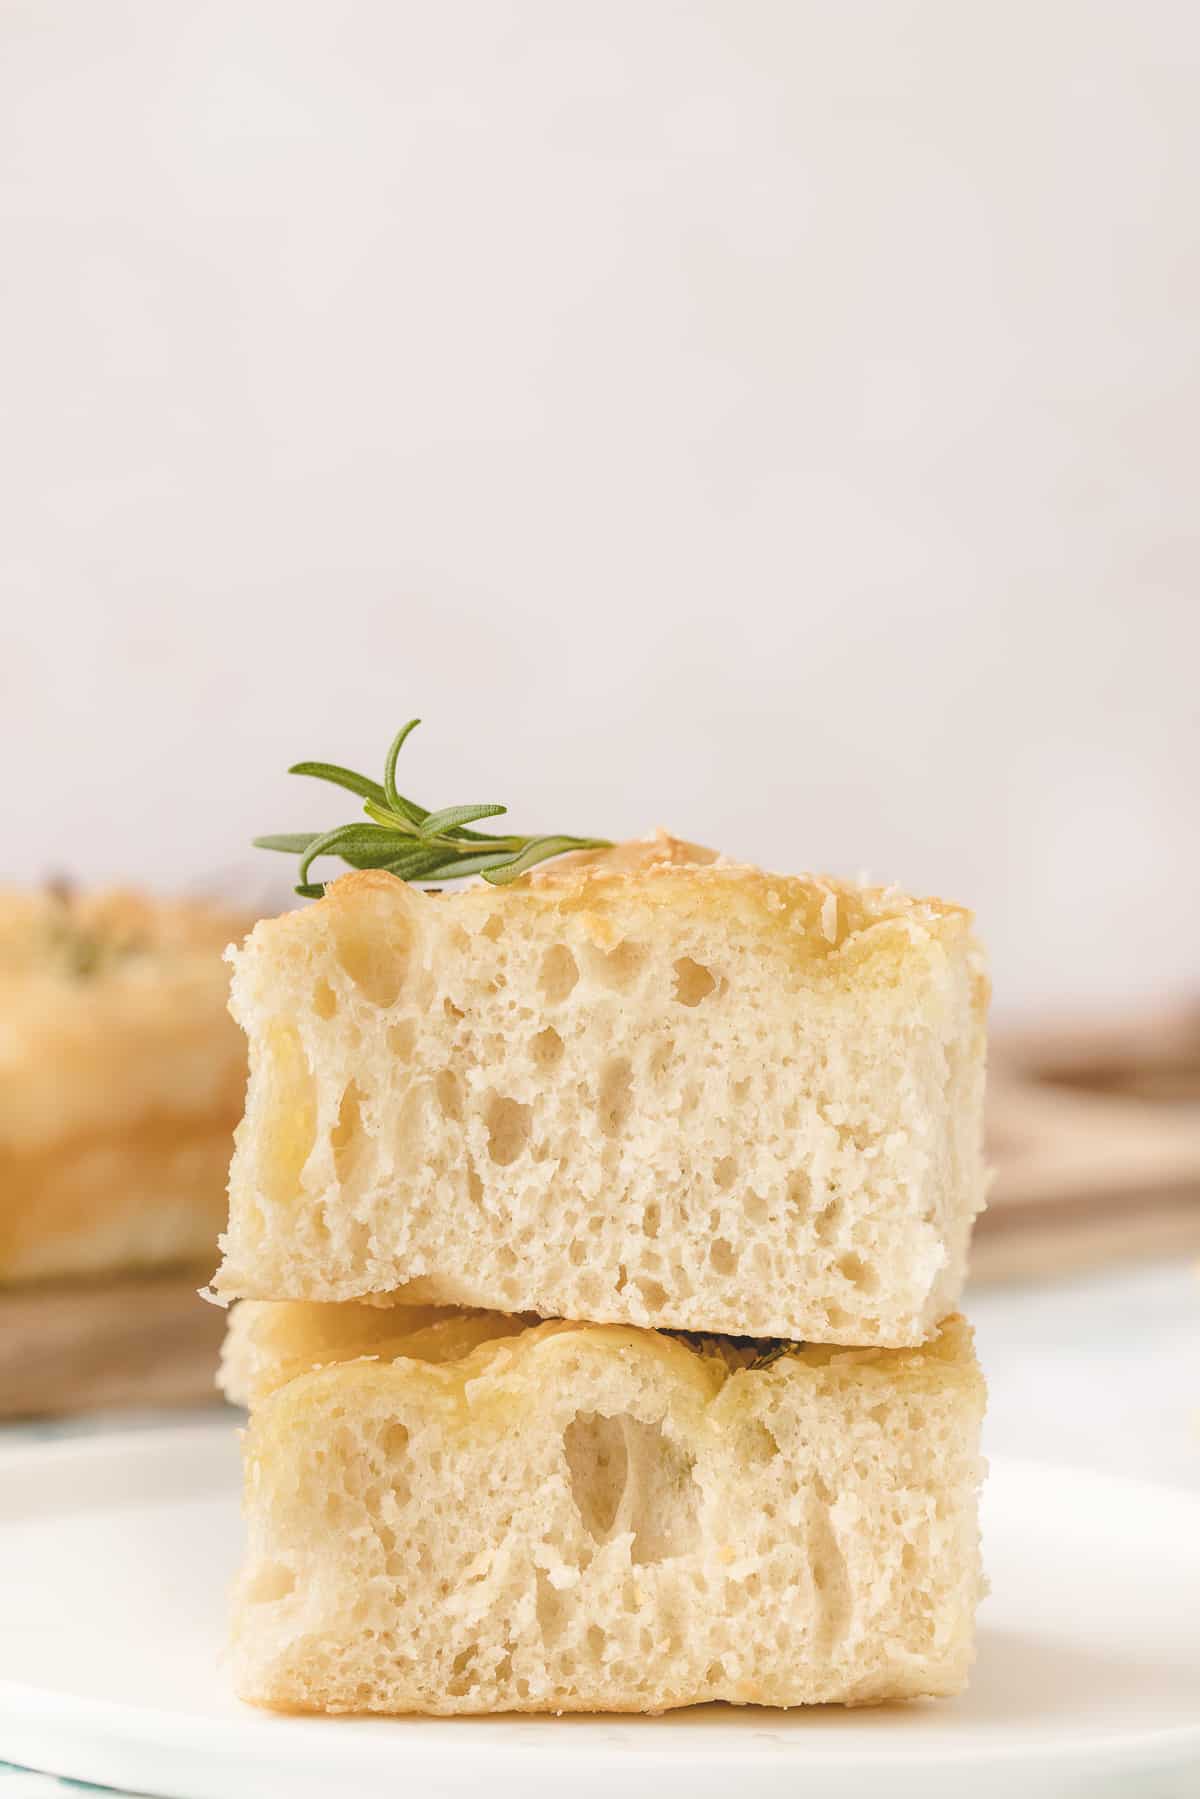 Two pieces of focaccia bread are placed on a white surface.